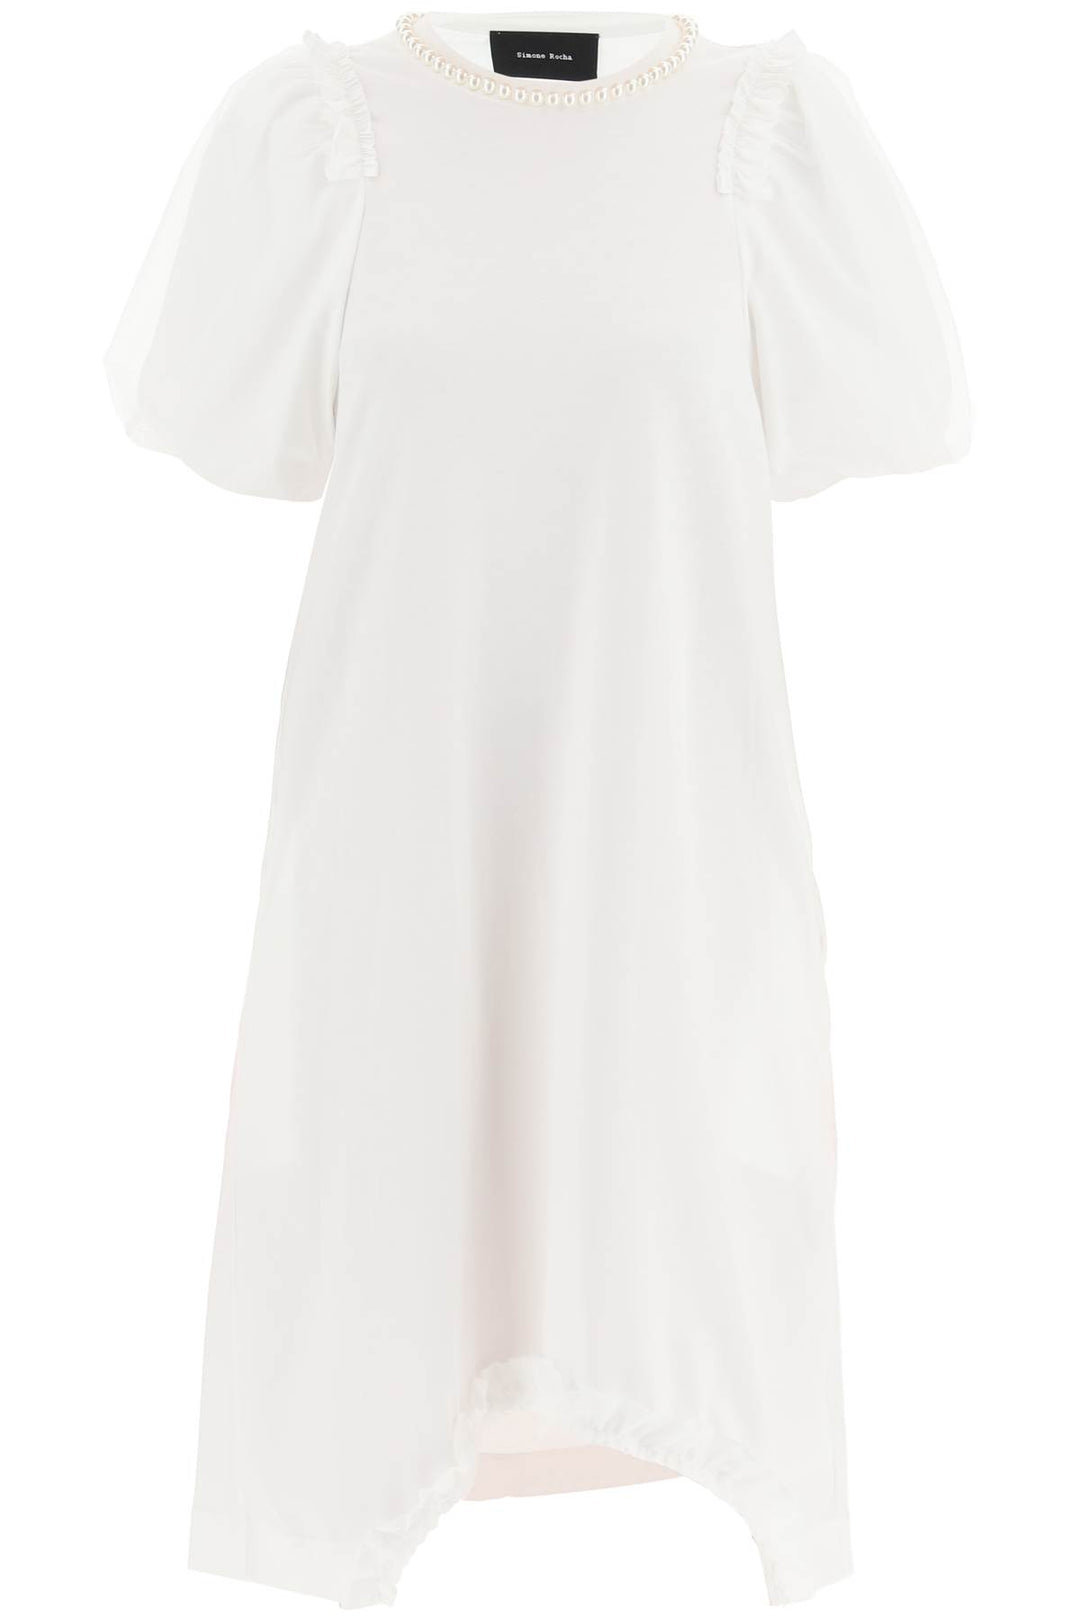 Simone rocha cotton dress with tulle sleeves and pearls-0